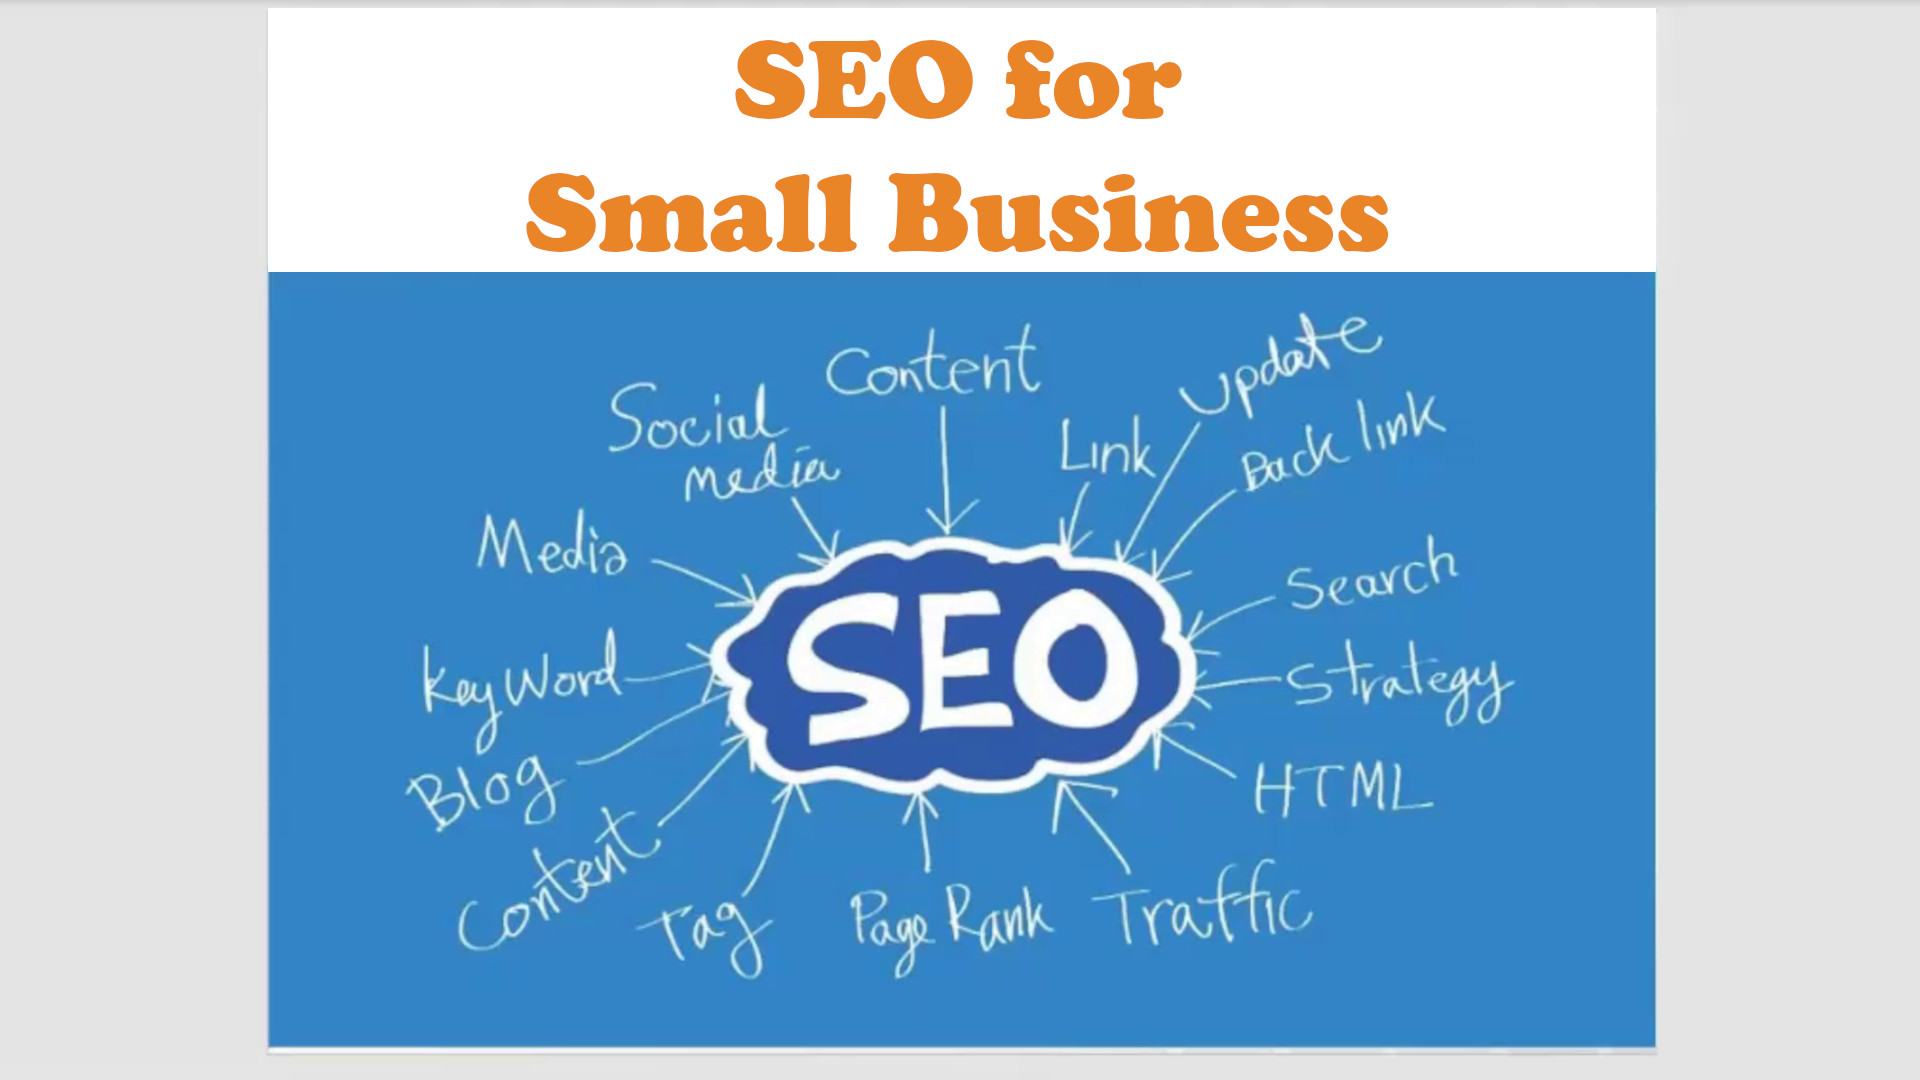 SEO for Small Business, text in orange over a white text on blue brain cloud of SEO terms, presented by Chaster Johnson of Stock Team up and Stock Boss Up, hosted by INSPIREsmall.biz